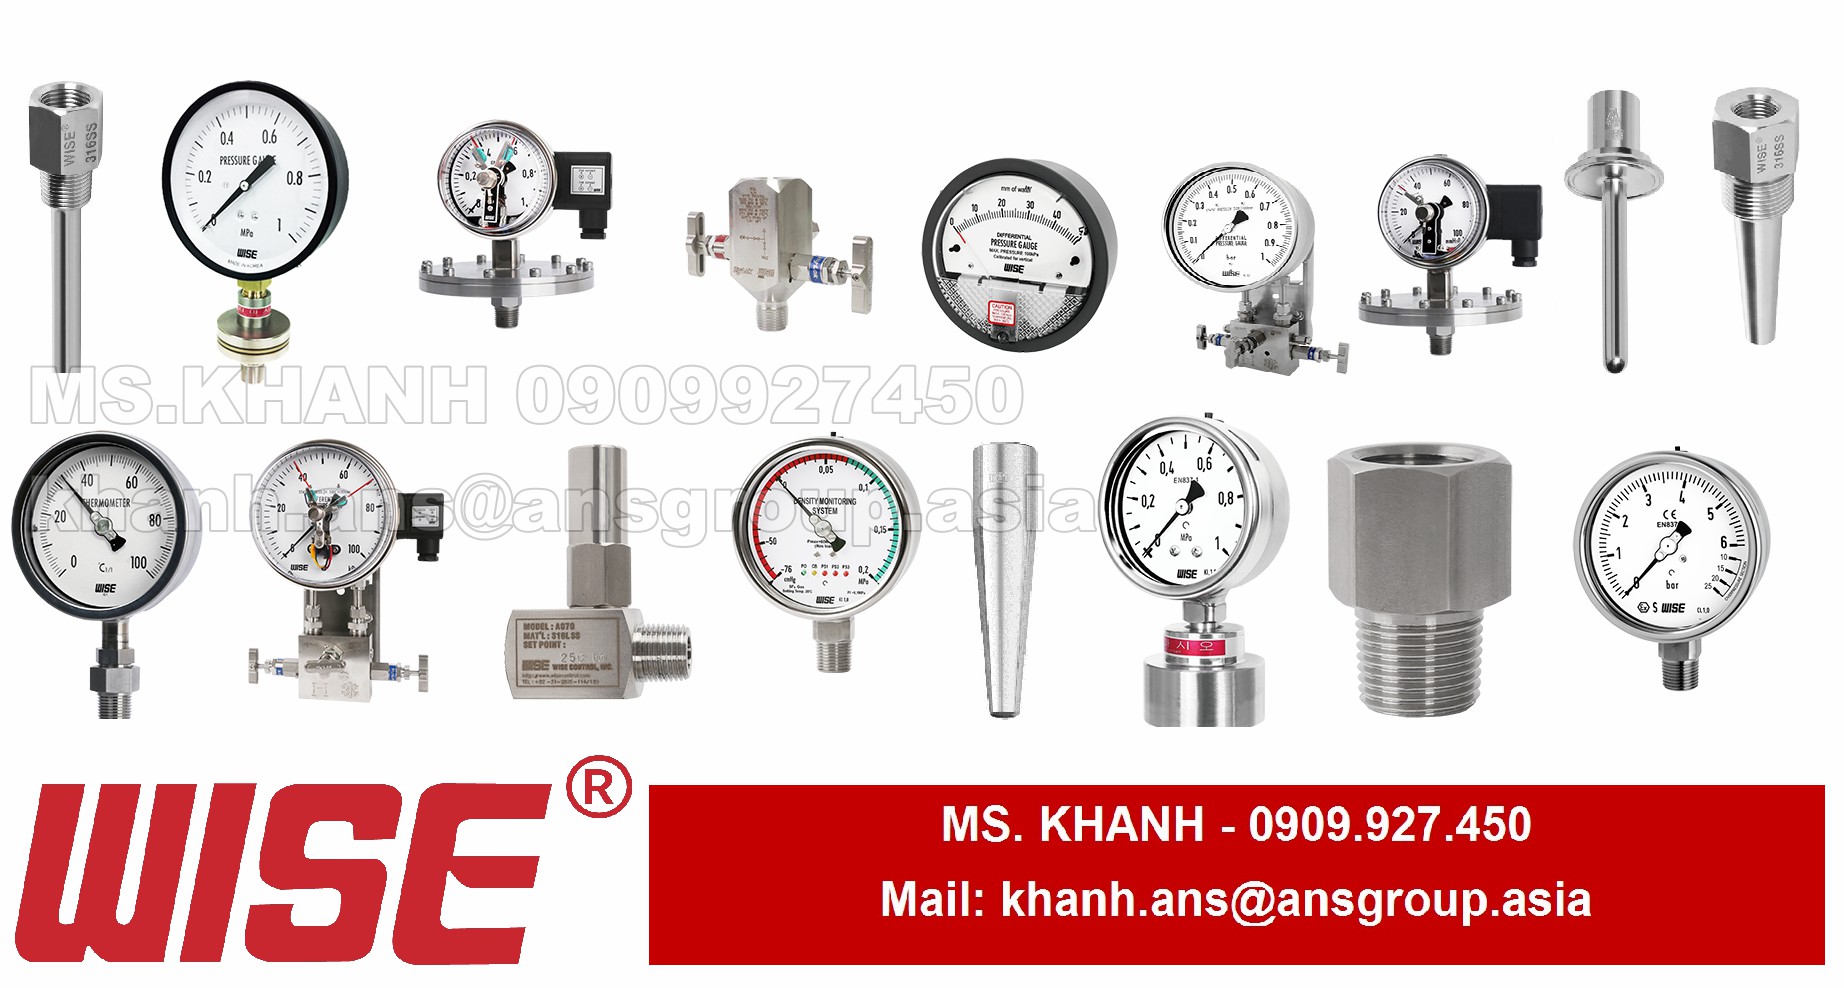 dong-ho-t1906y1ef1102k0-process-industry-bimetal-thermomete-wise-control-vietnam-1.png